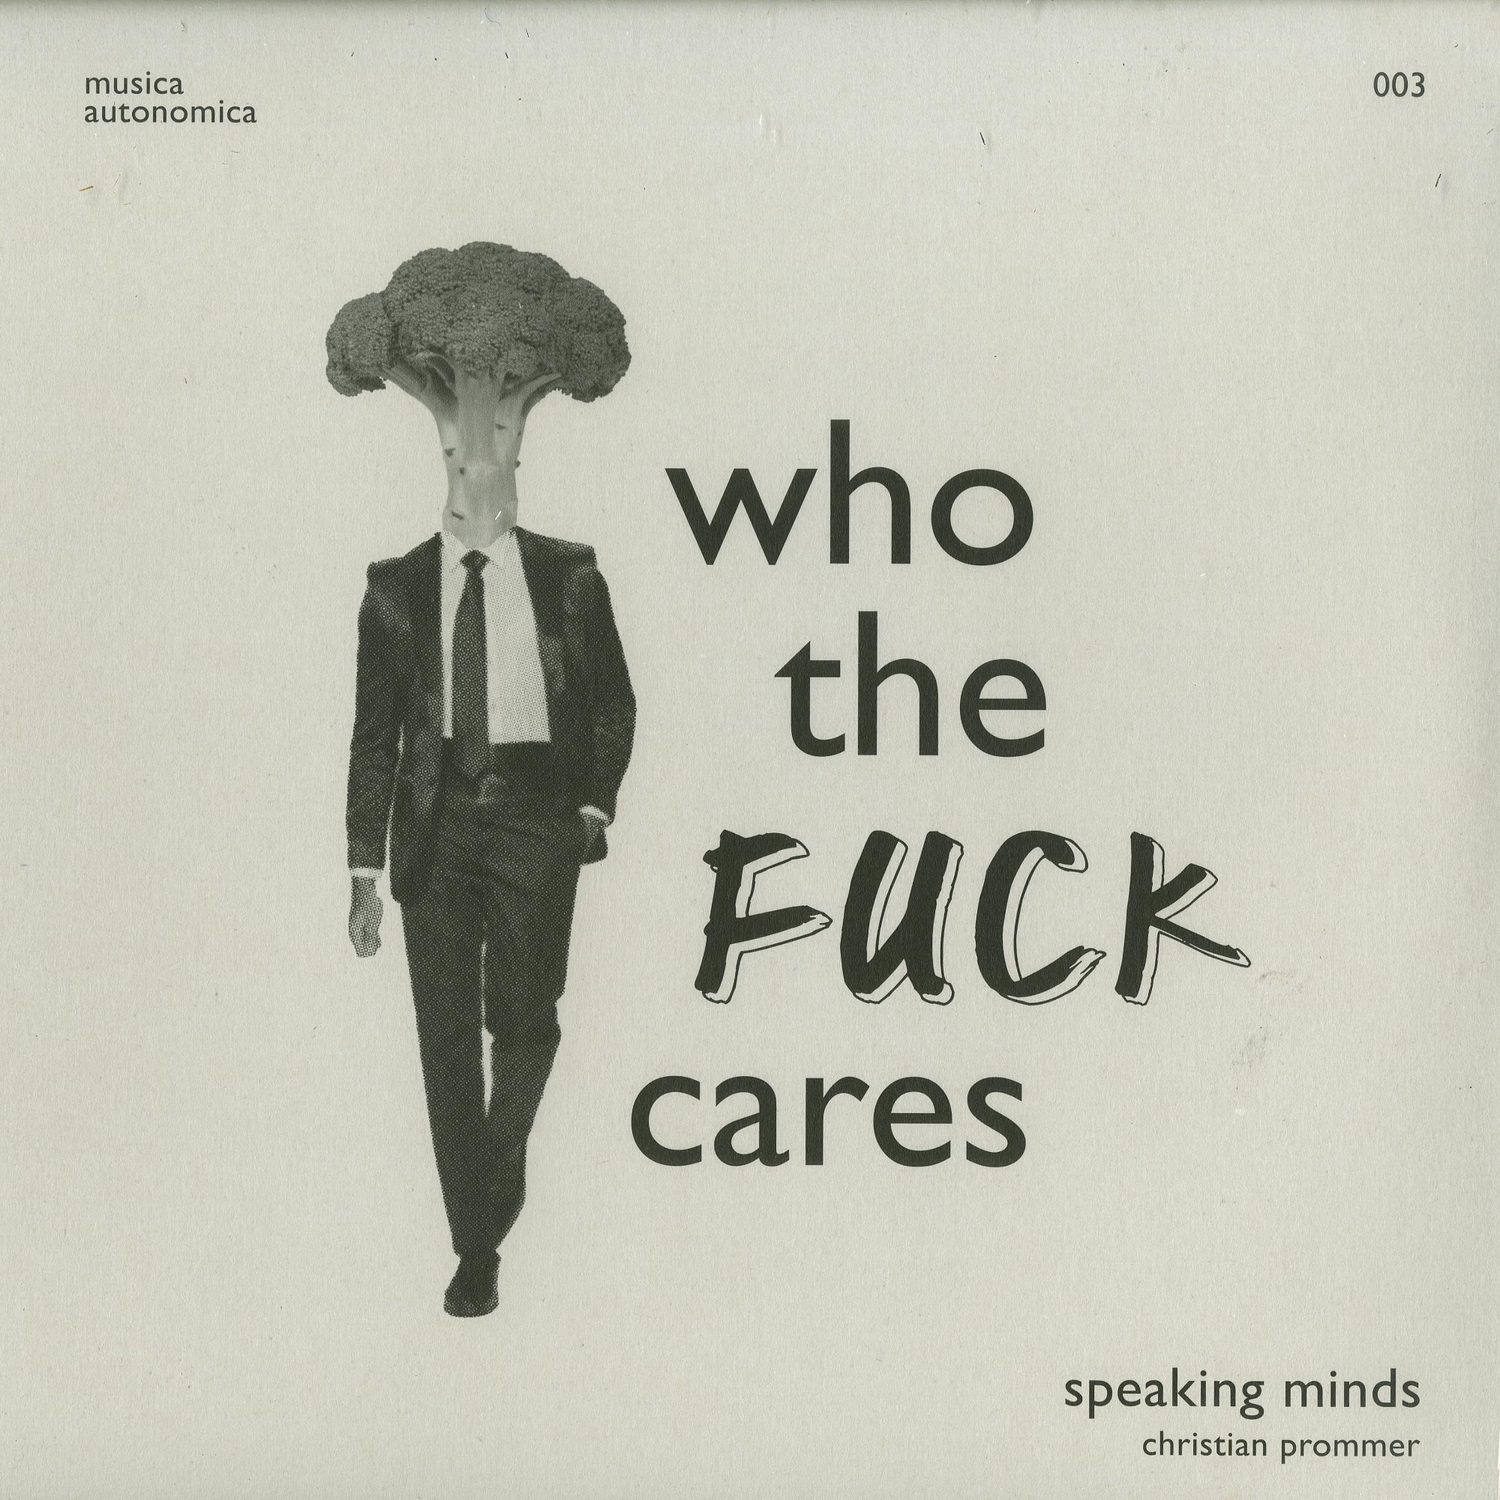 Speaking Minds - WHO THE FUCK CARES 